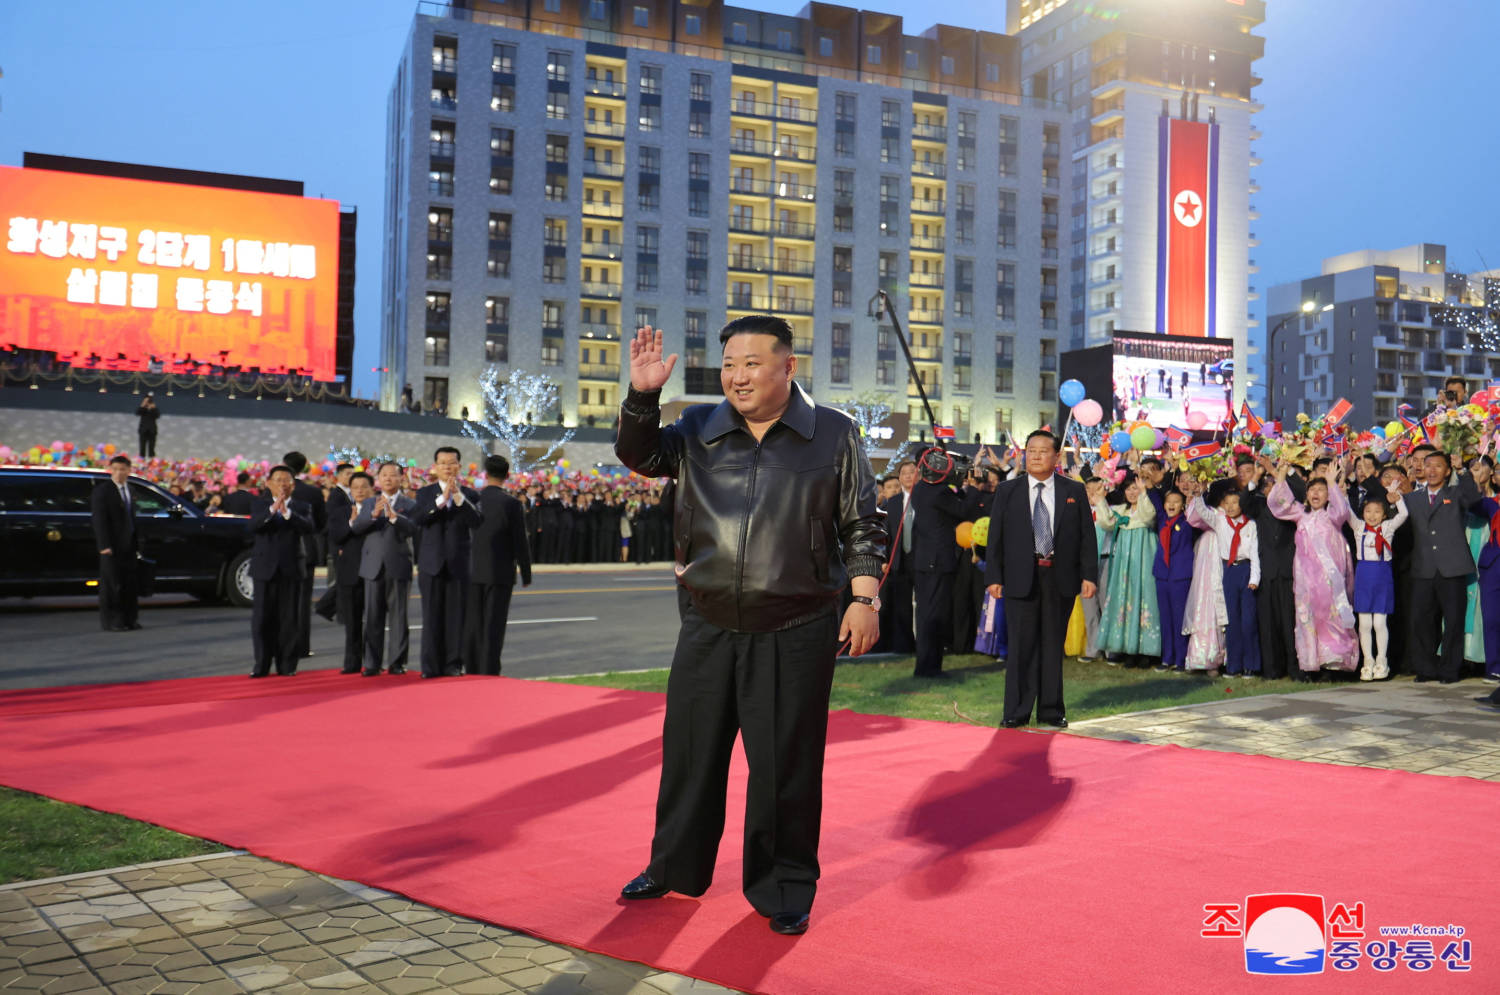 North Korean Leader Kim Jong Un Attends A Completion Ceremony For A Residential Development Area In Hwasong District